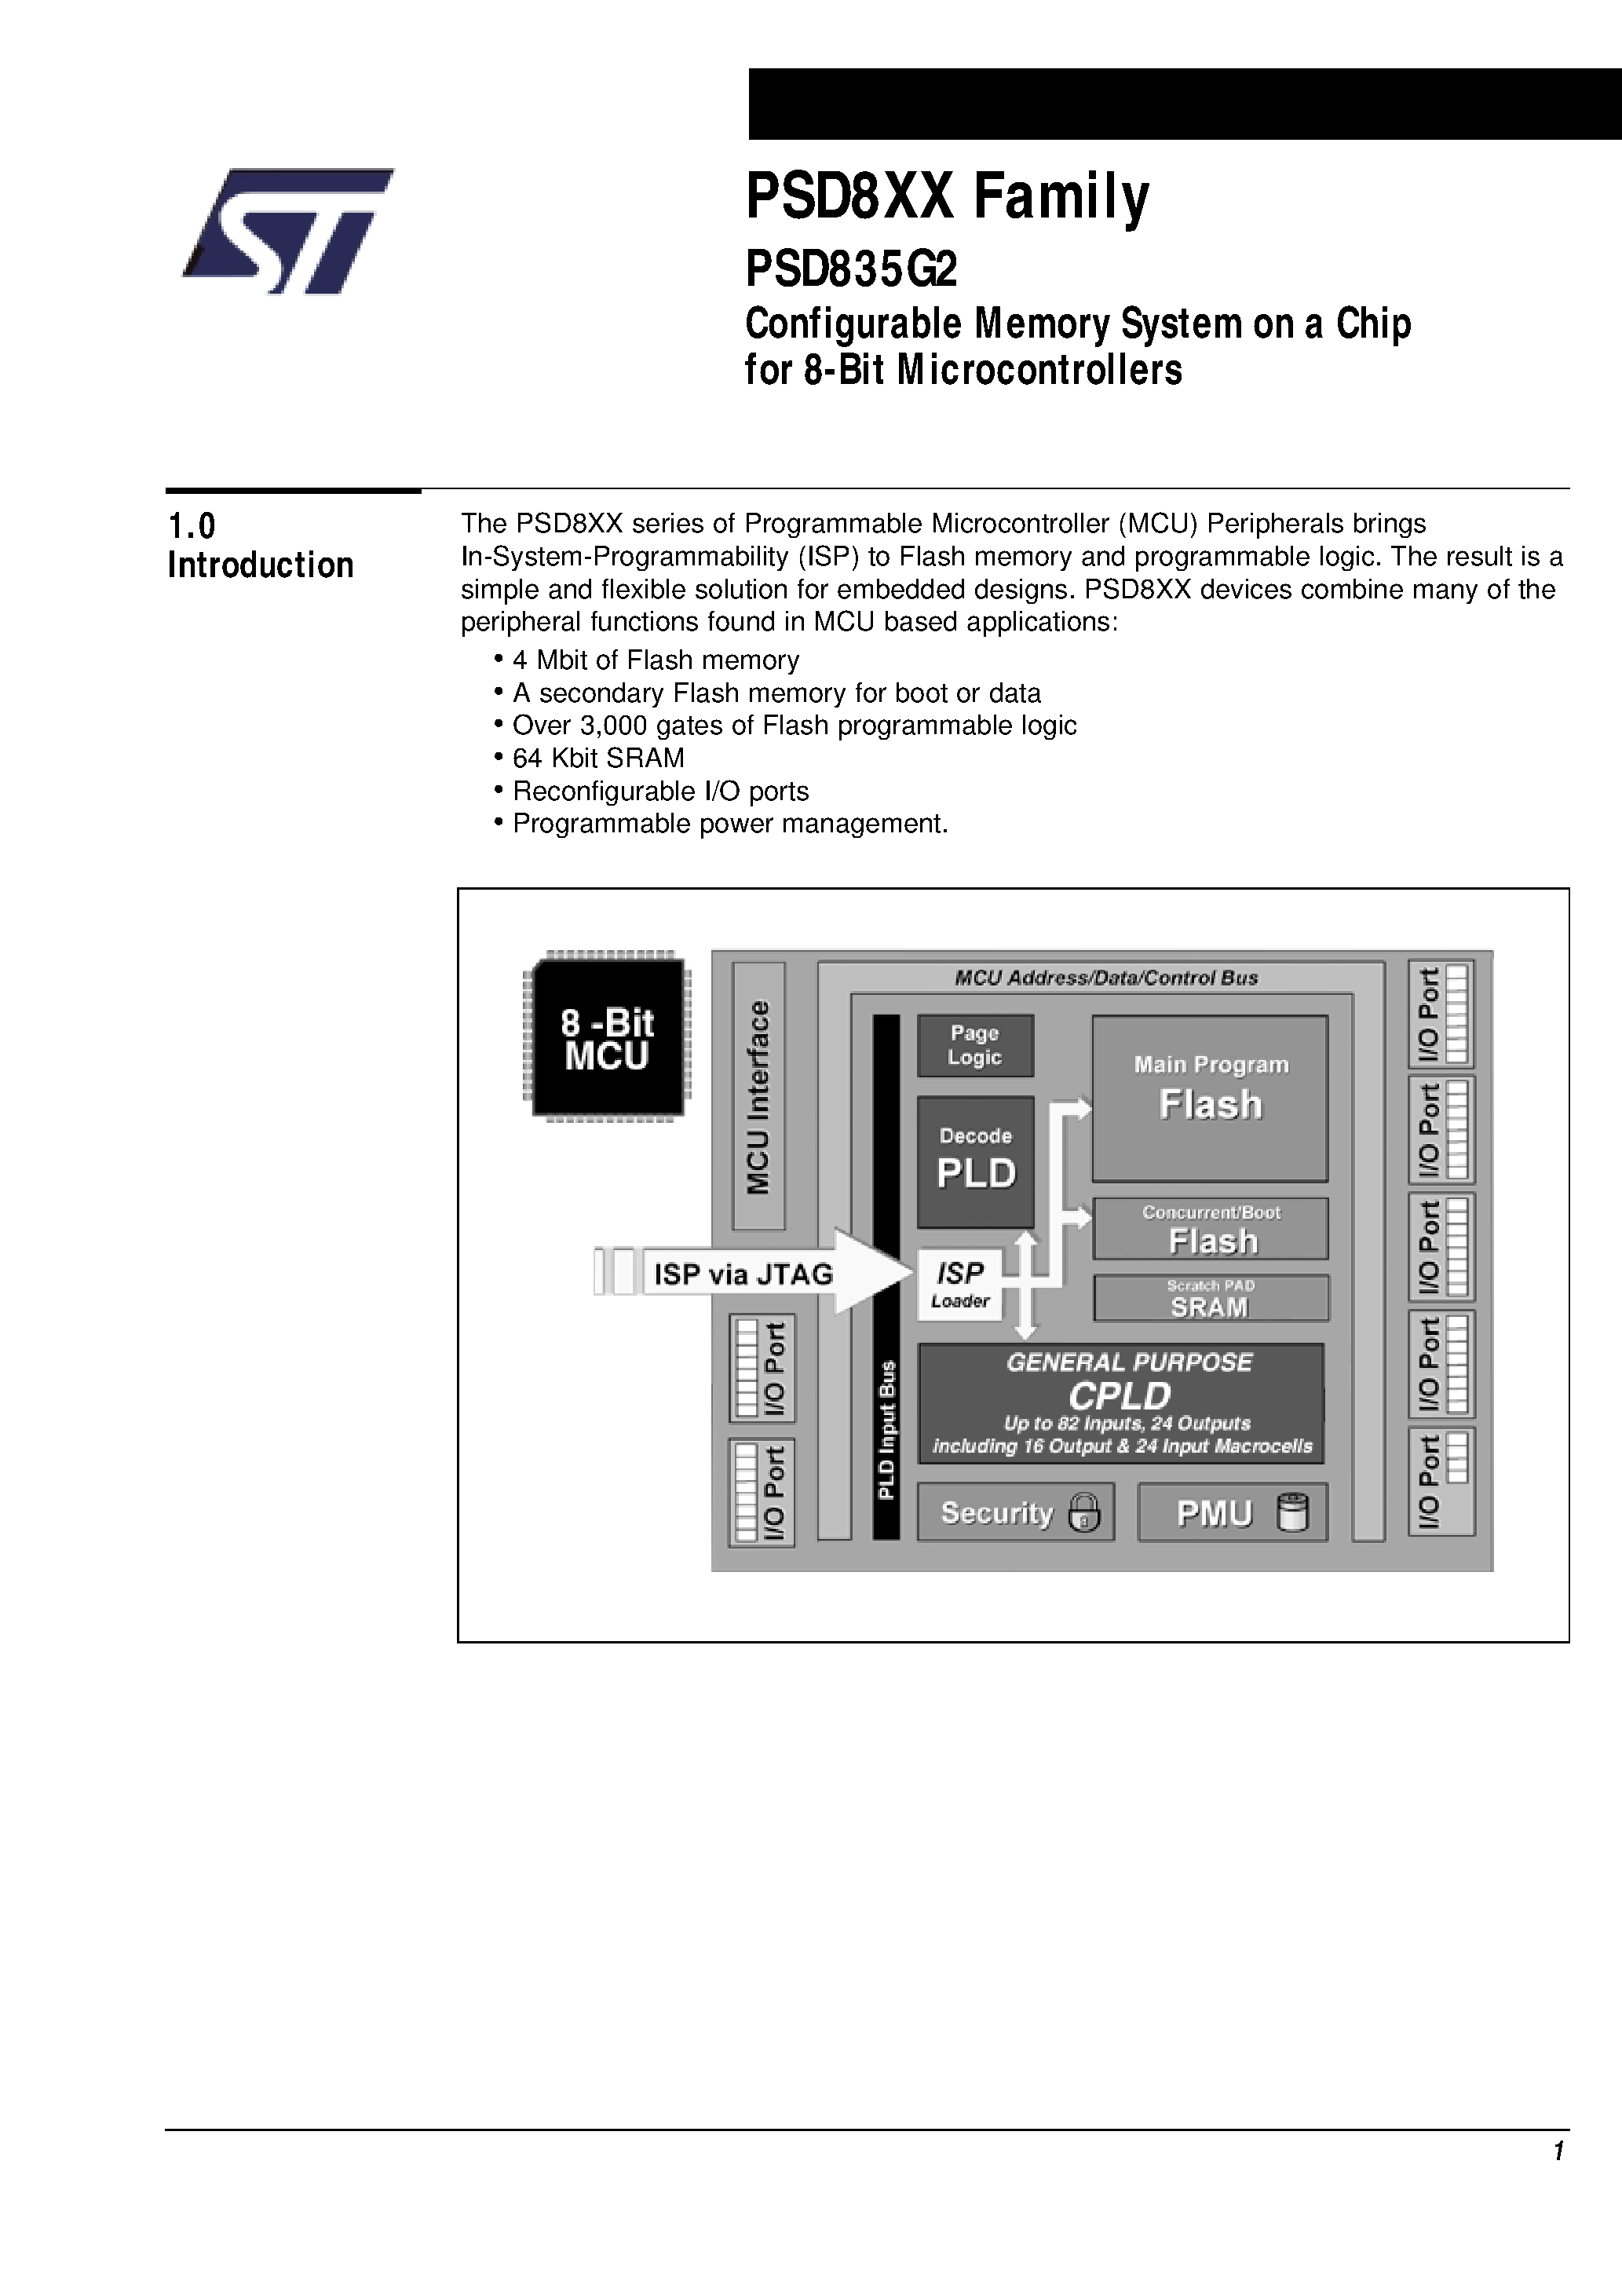 Datasheet PSD835F1V-A-15JI - Configurable Memory System on a Chip for 8-Bit Microcontrollers page 2